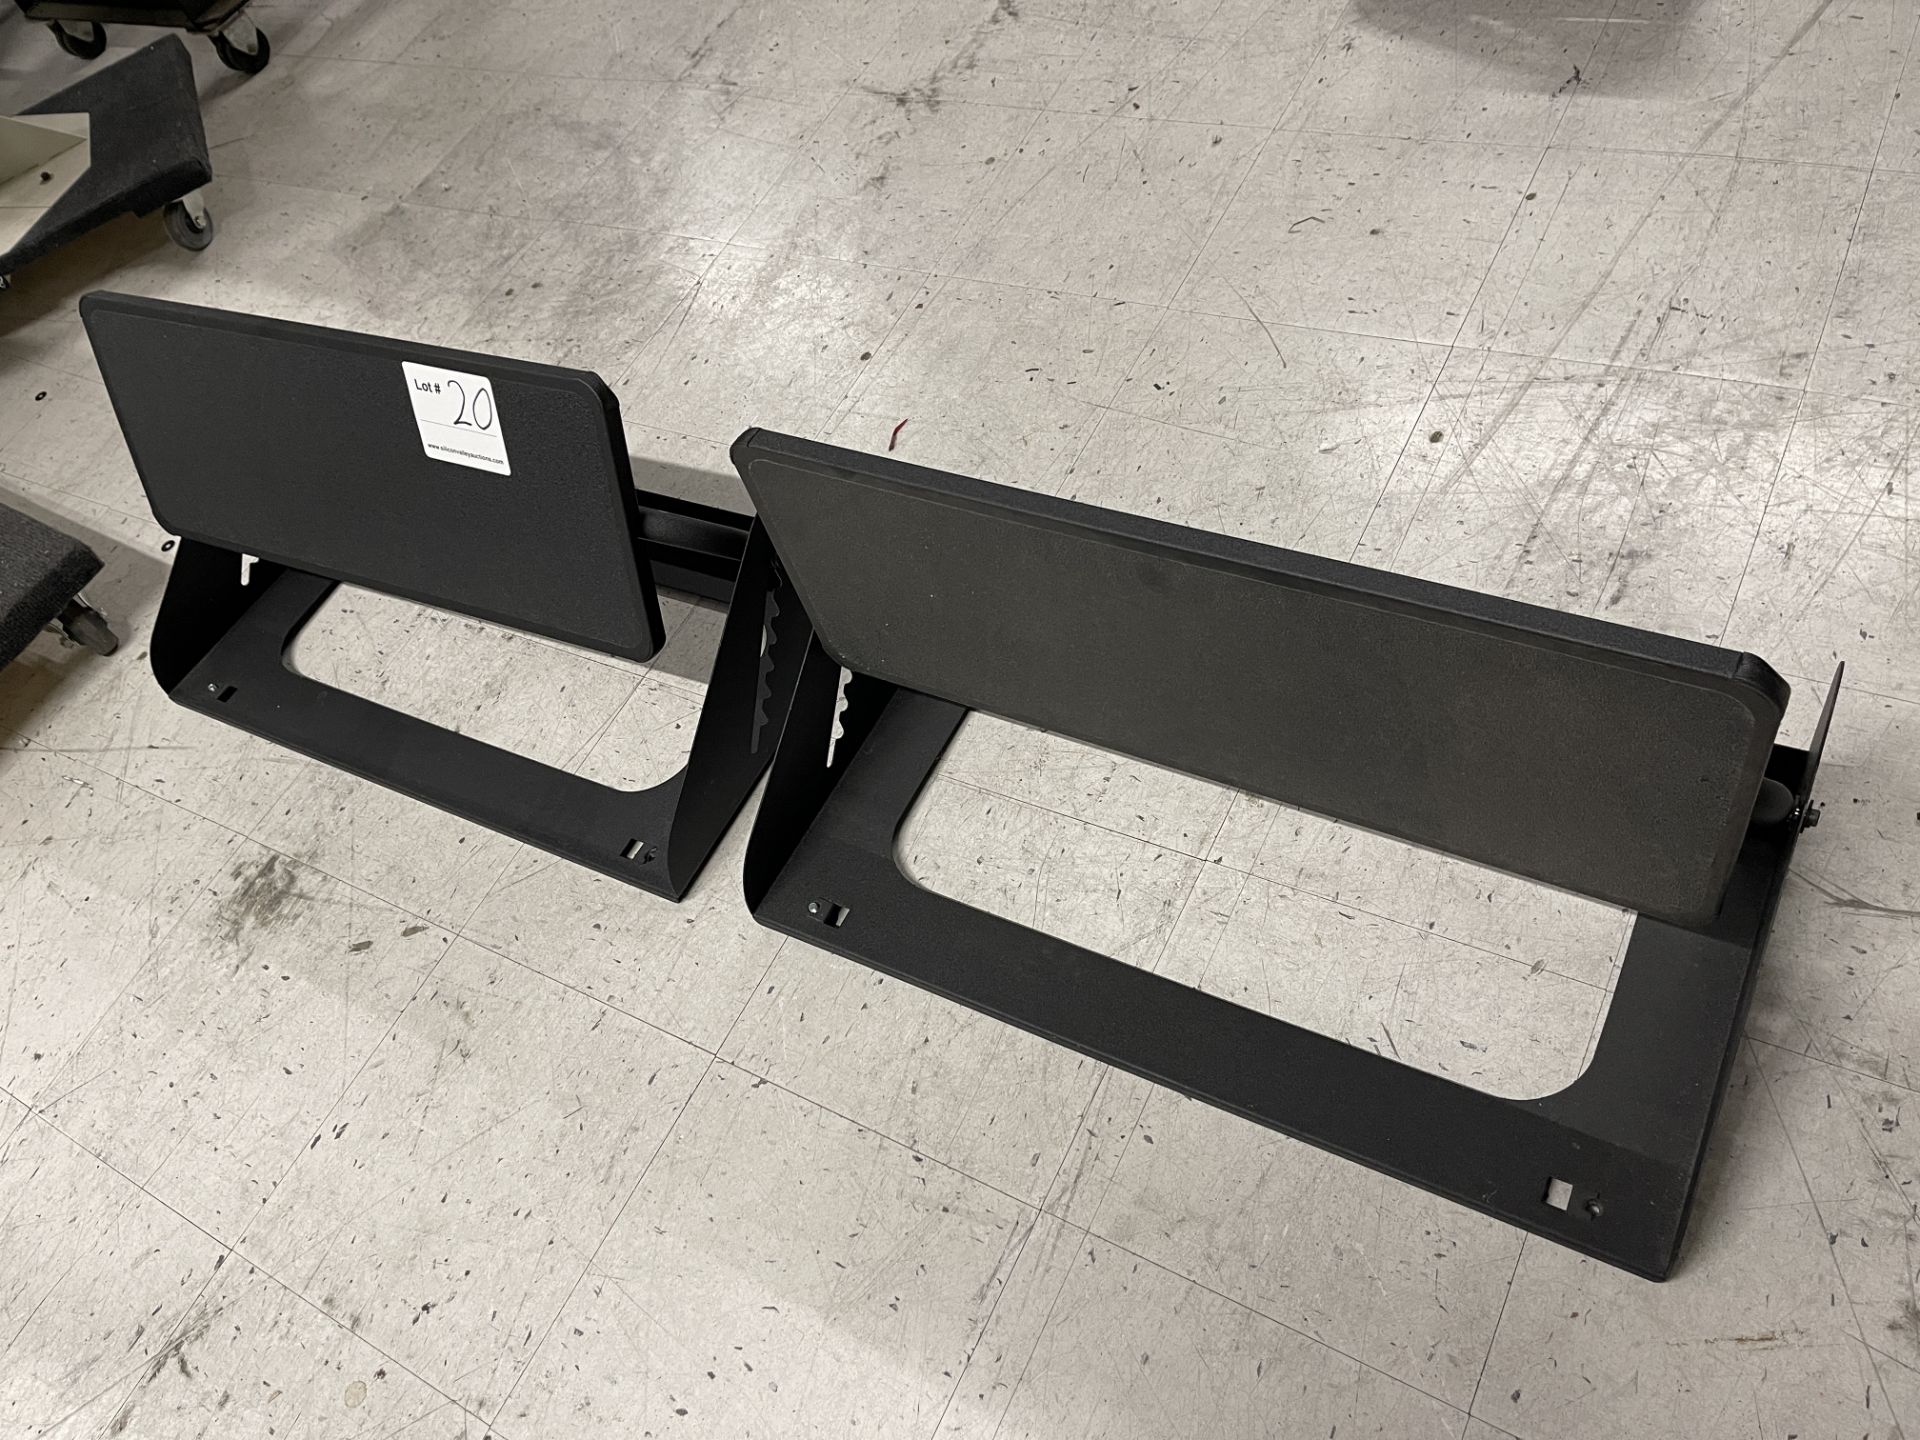 Pair of IAC INDUSTRIES Industrial Footrest, 30 inches - Image 2 of 2